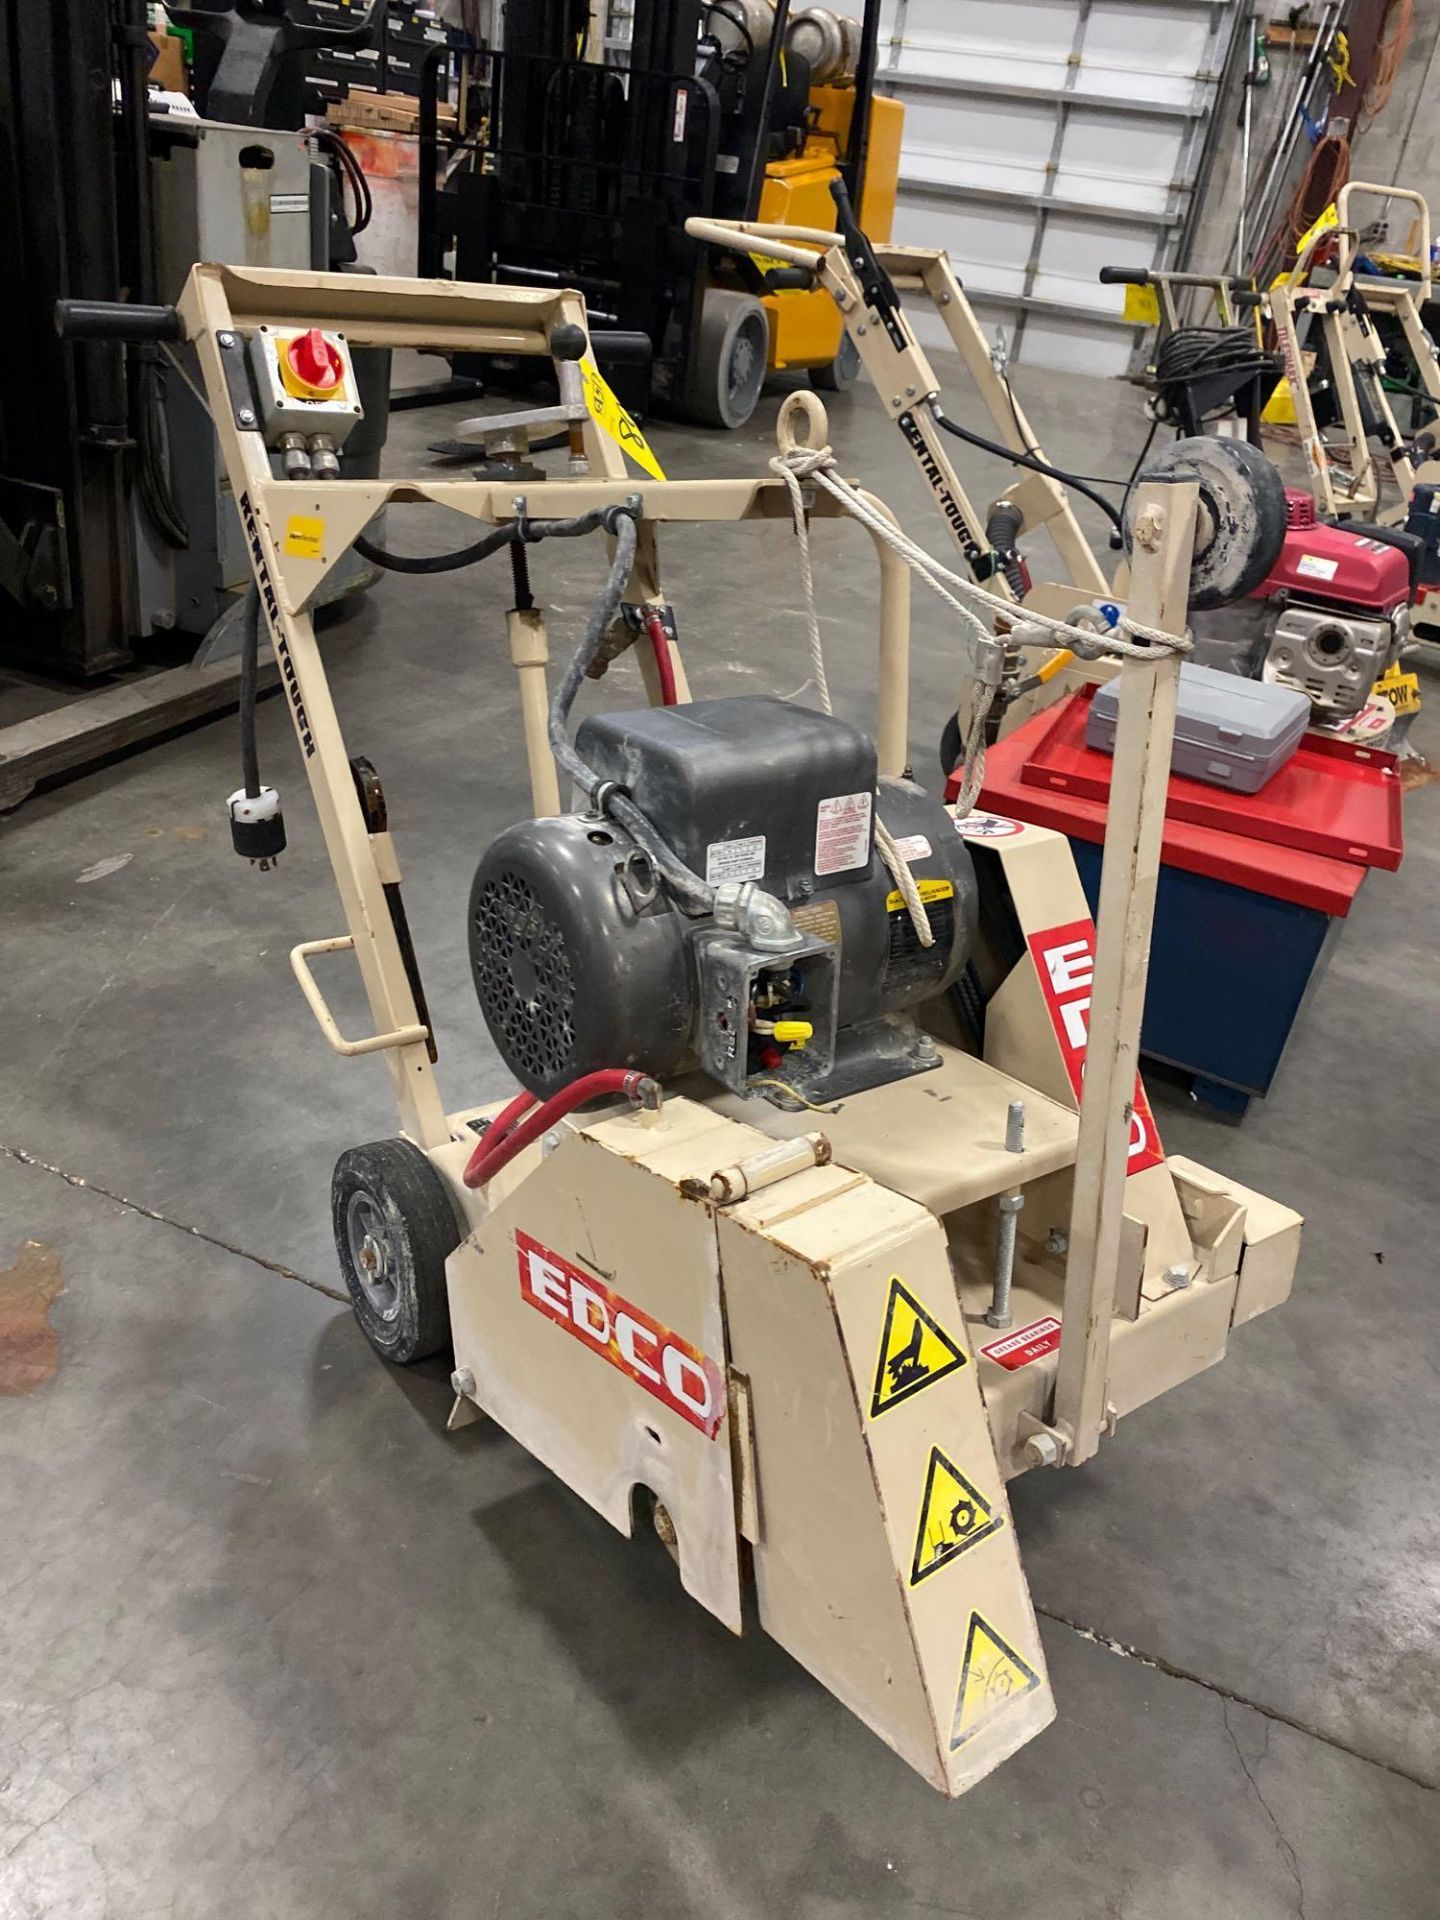 2017 EDCO DS-18-5 WALKBEHIND SAW SUPPORT EQUIPMENT - Image 13 of 20